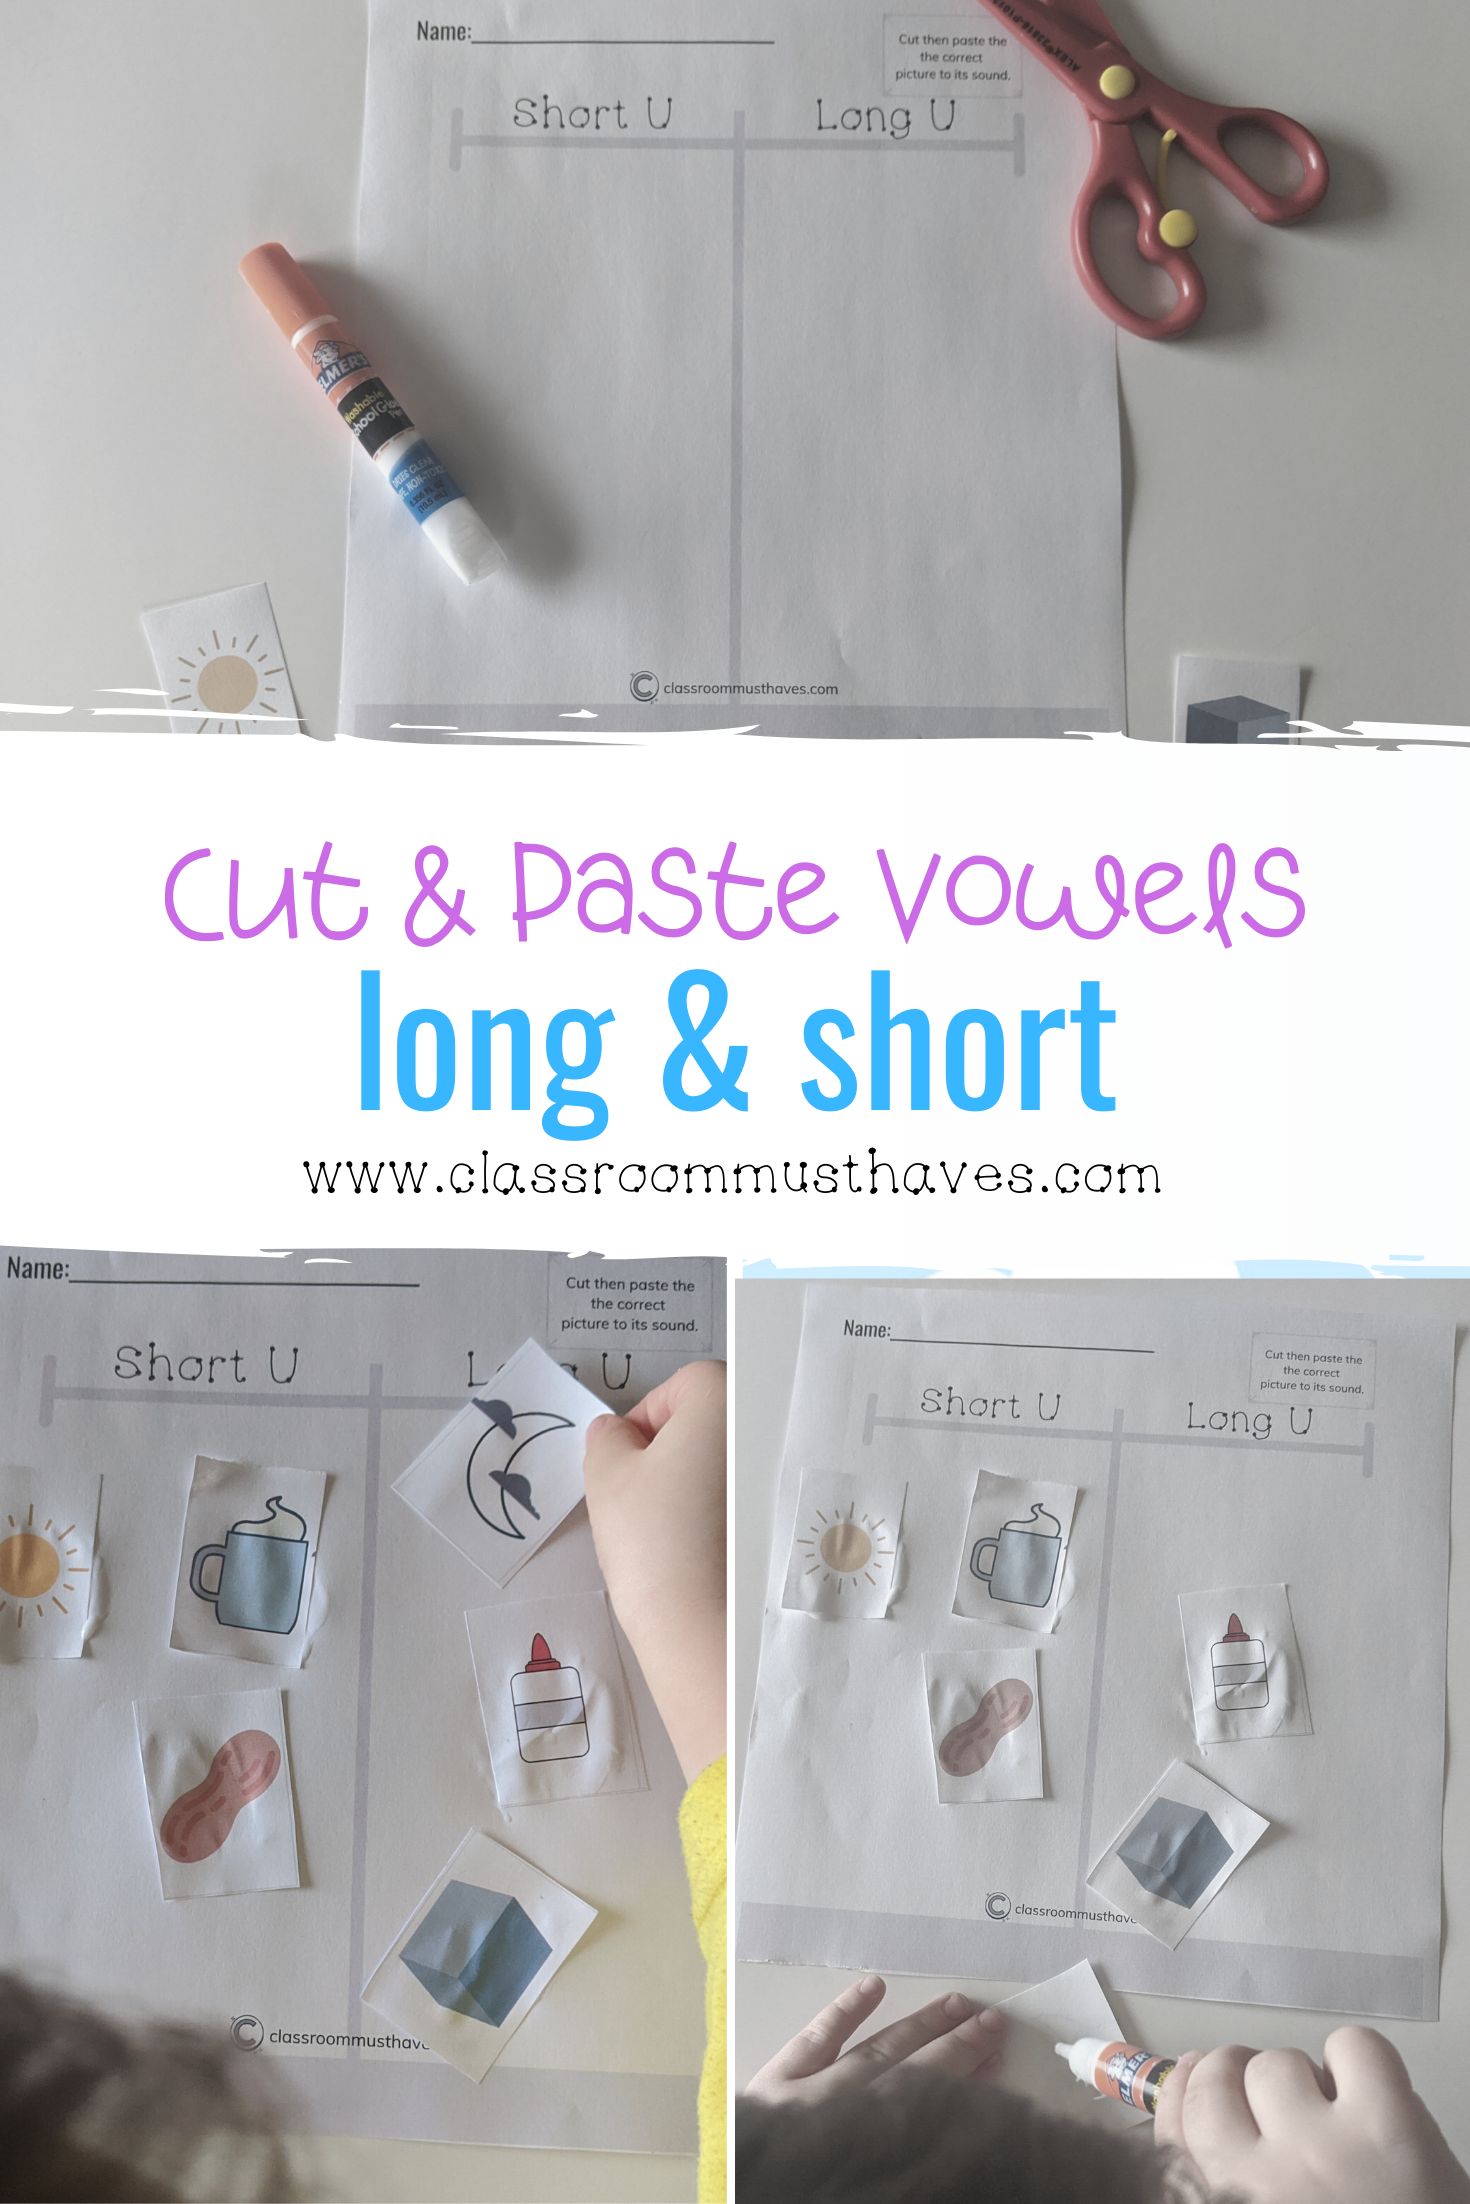 FREE Vowel Sounds Cut & Paste Activity! Great hands-on review of short and long vowel sounds. via @classroommusthaves